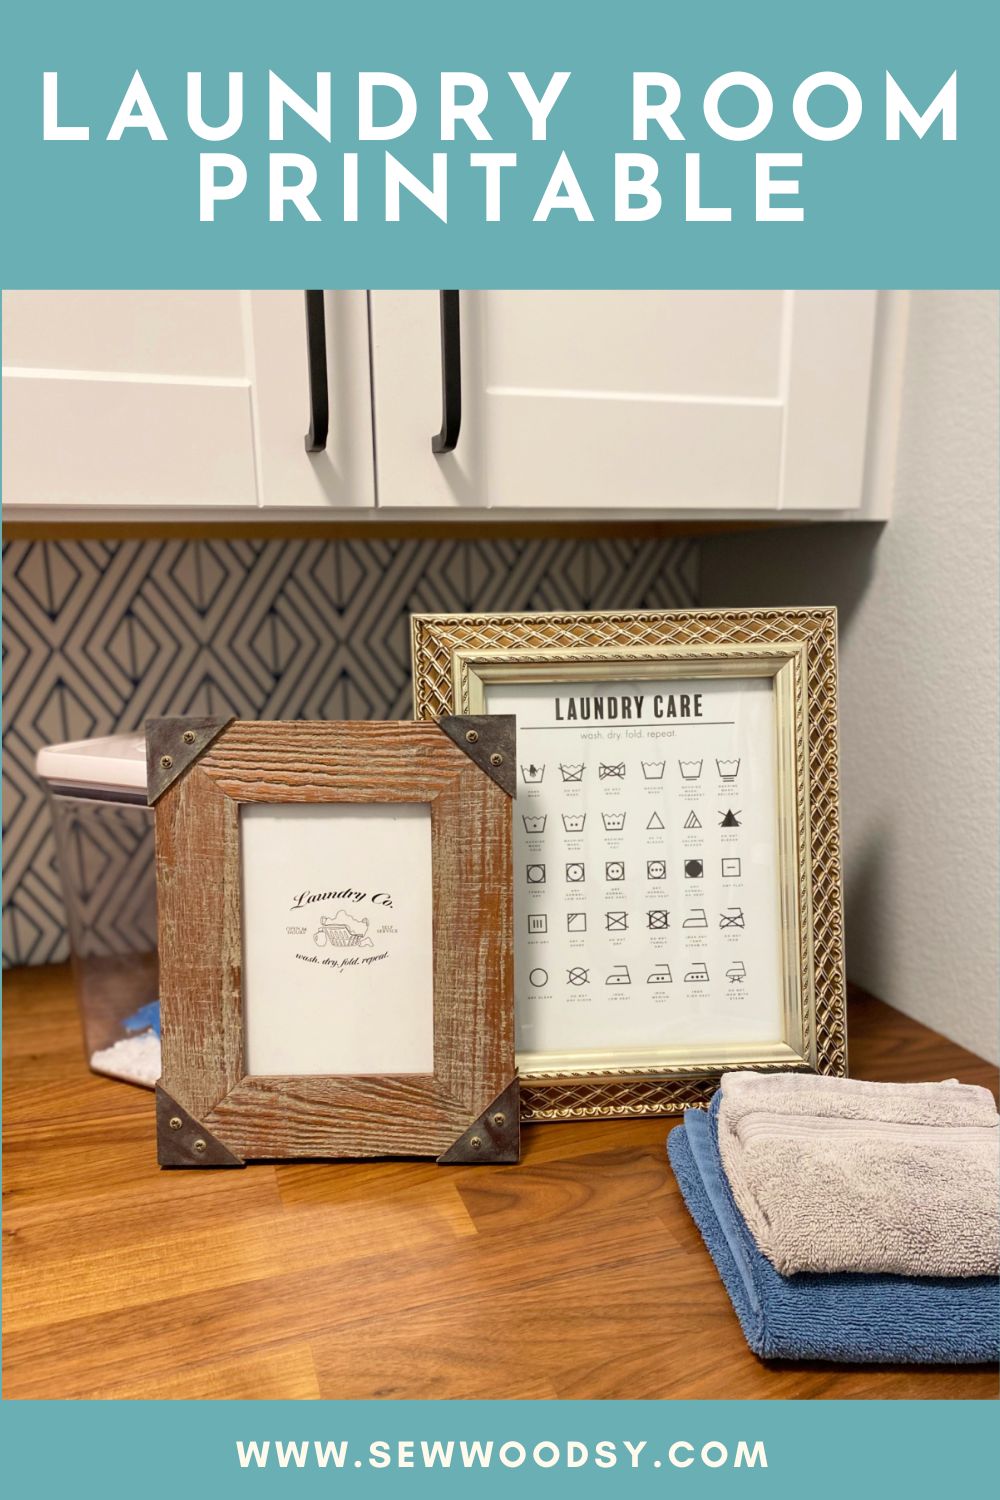 A gold picture frame with a wooden picture frame with laundry printables in them and text on image for Pinterest.